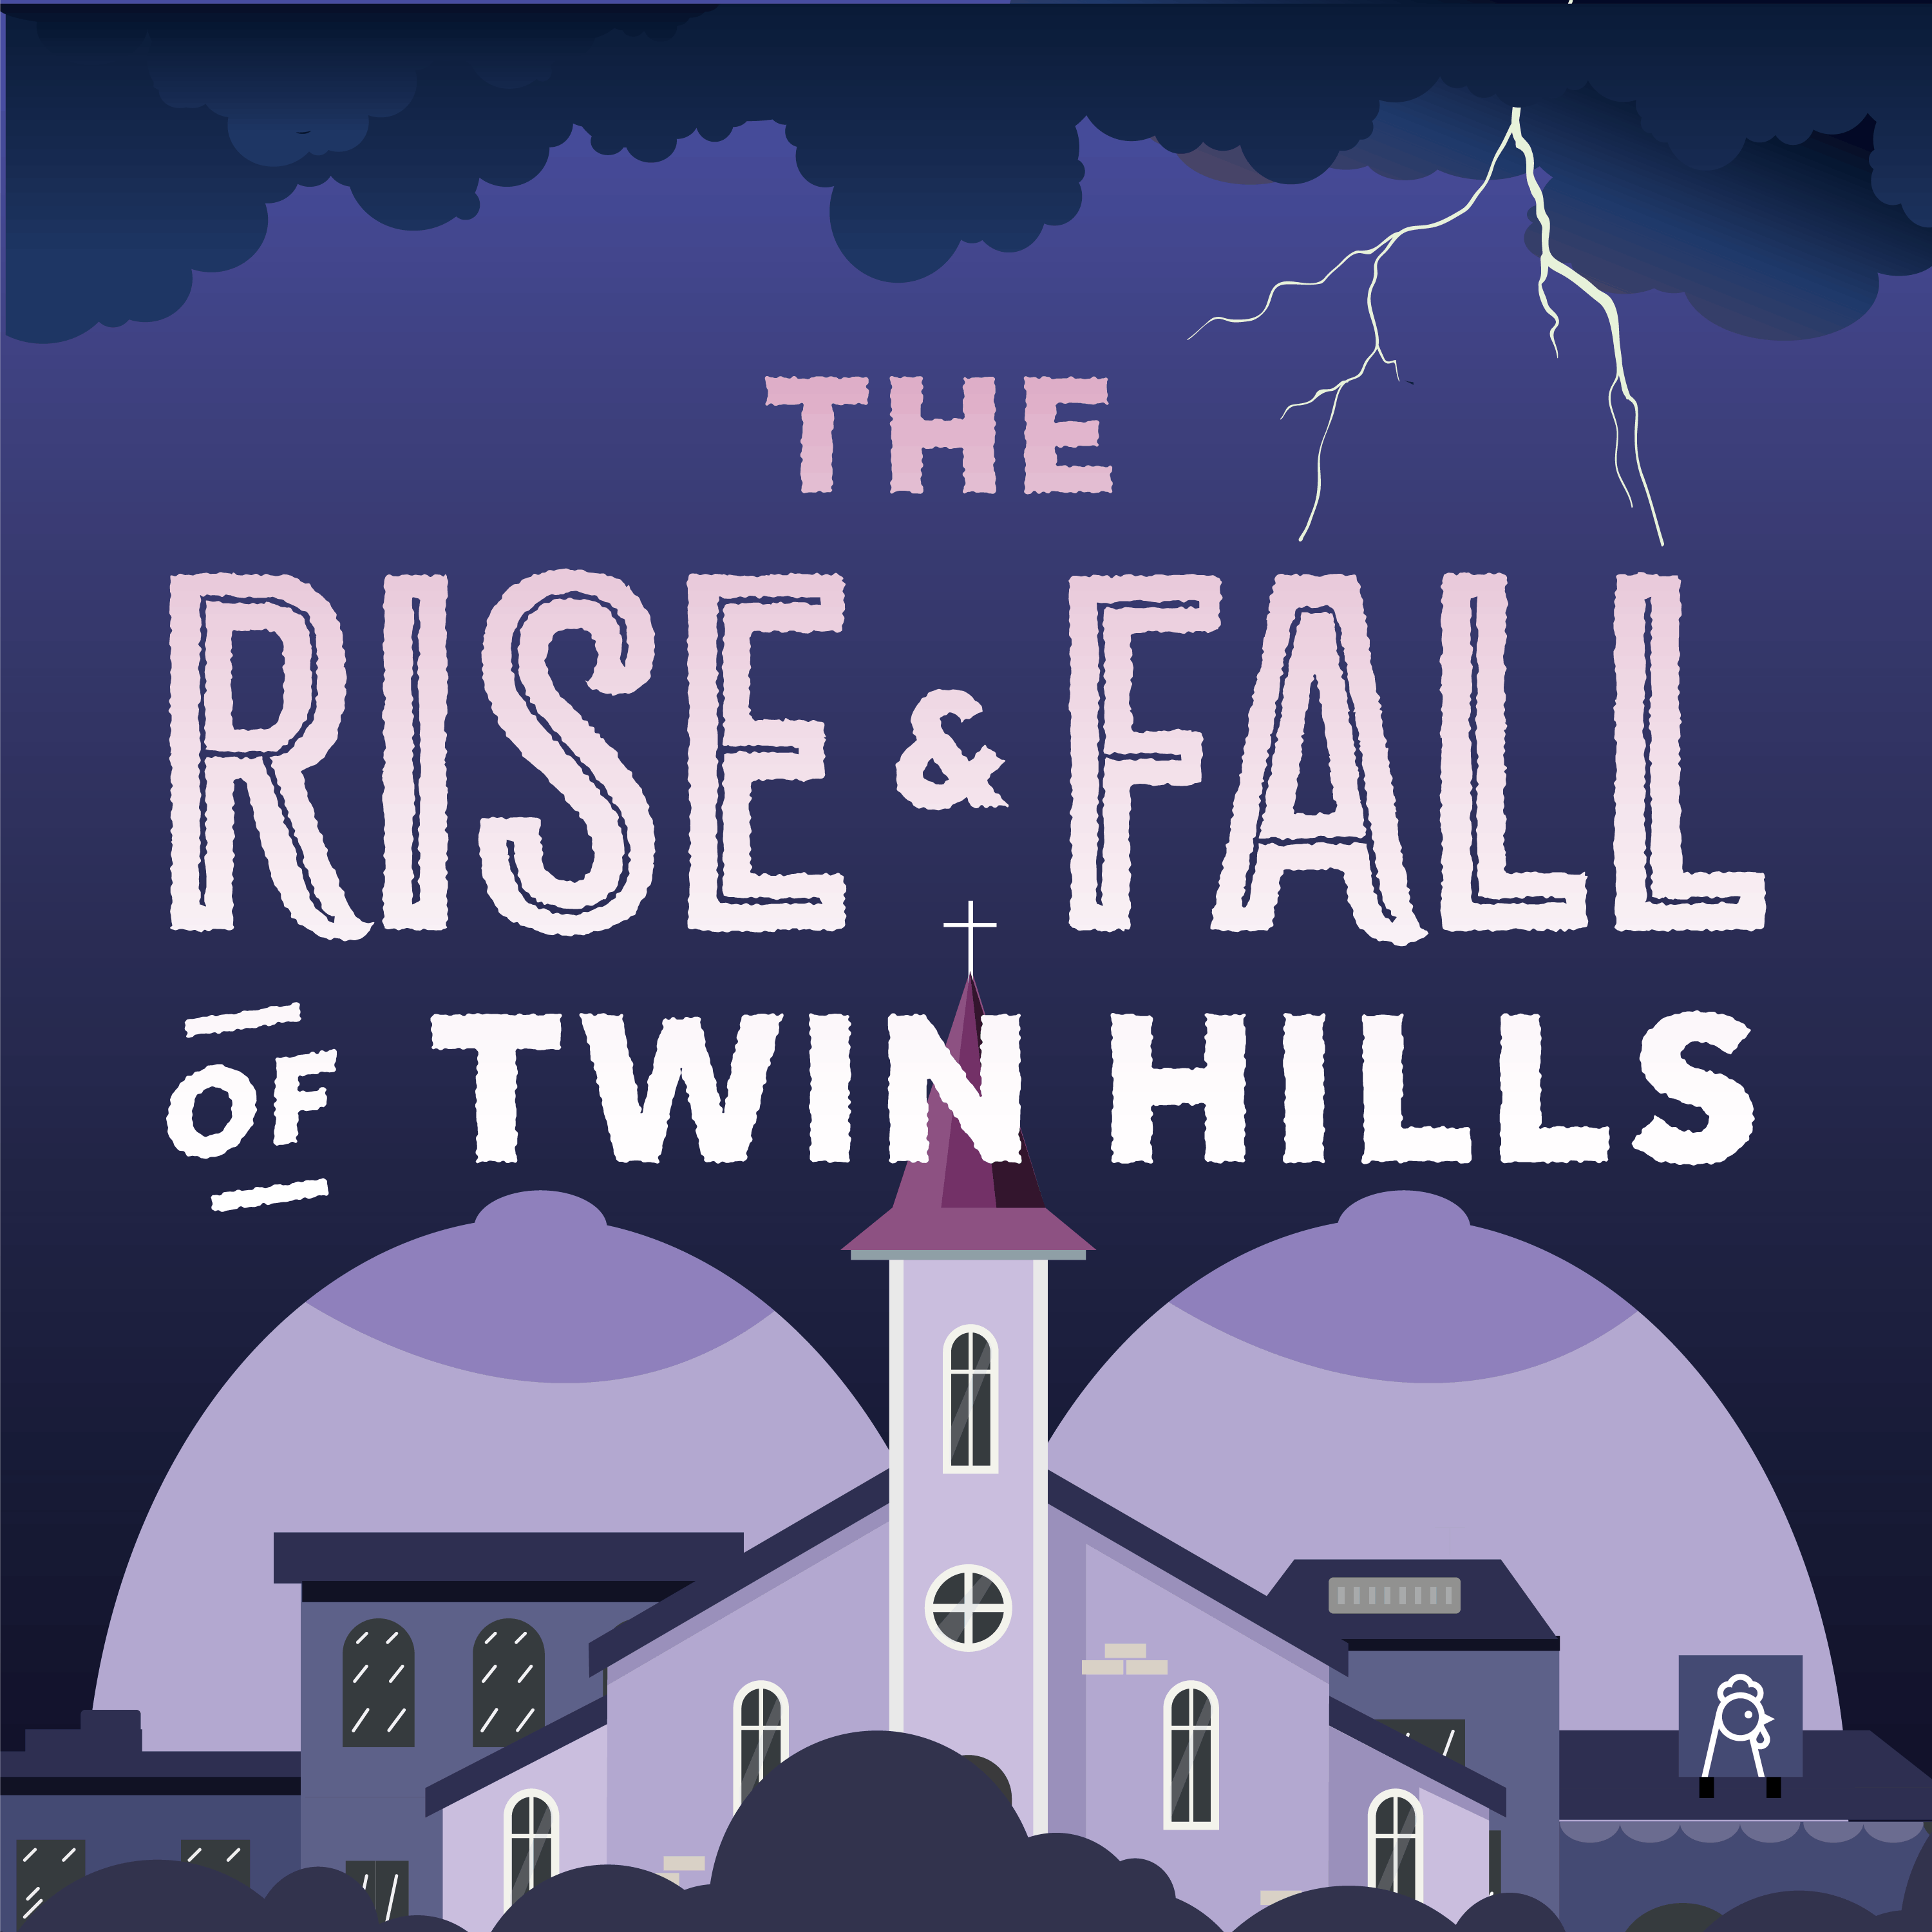 Part 2: The Rise and Fall of Twin Hills ”Mr. Butt”